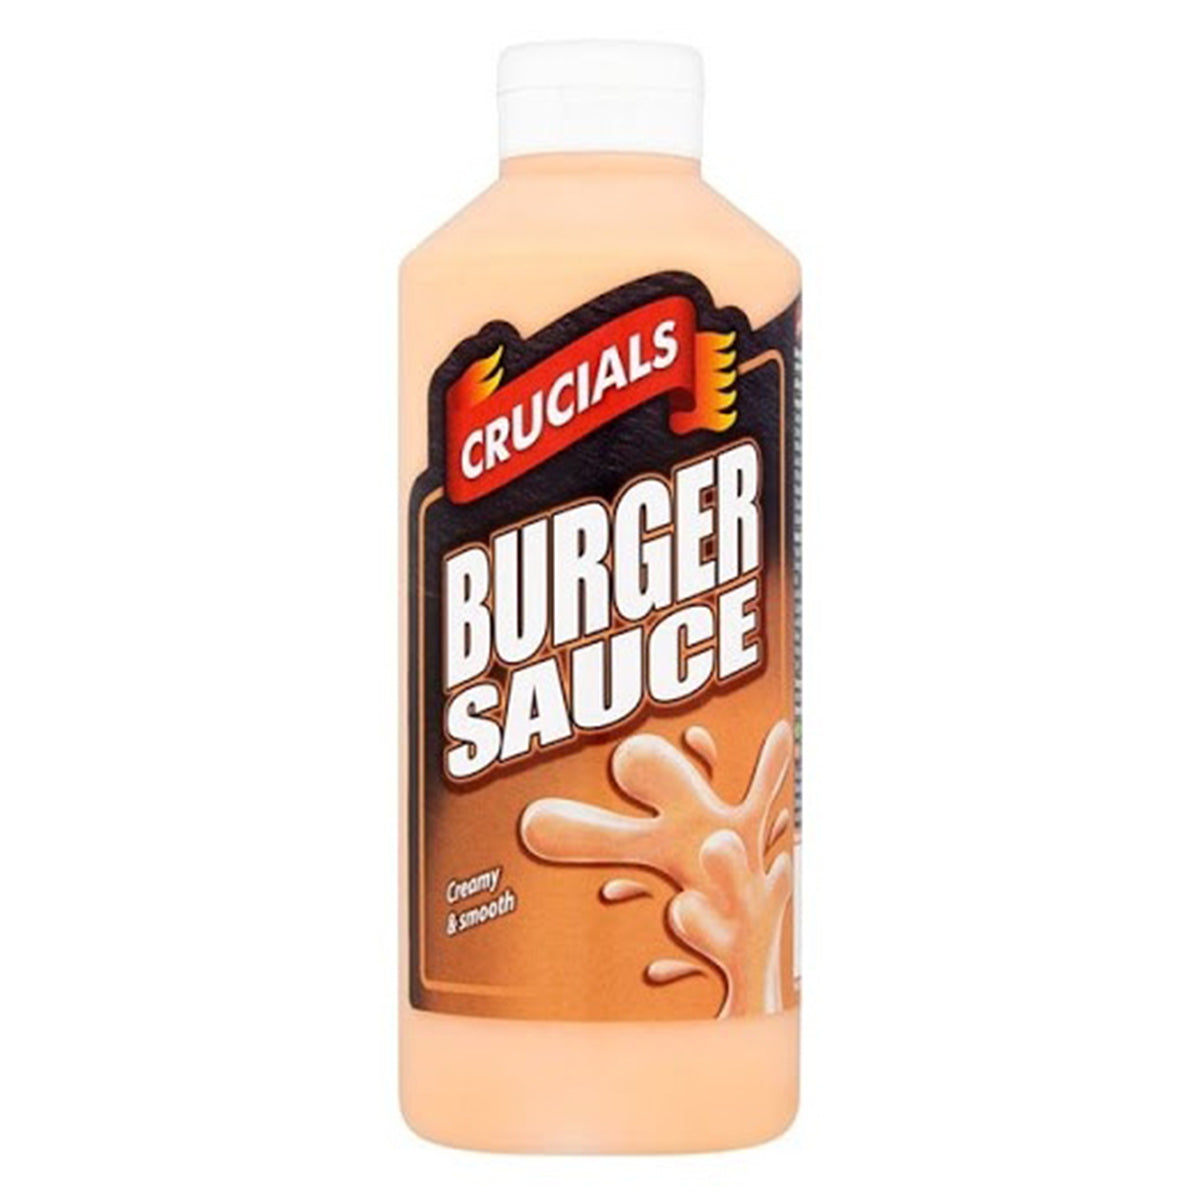 A bottle of Crucials - Burger Sauce - 500ml on a white background.